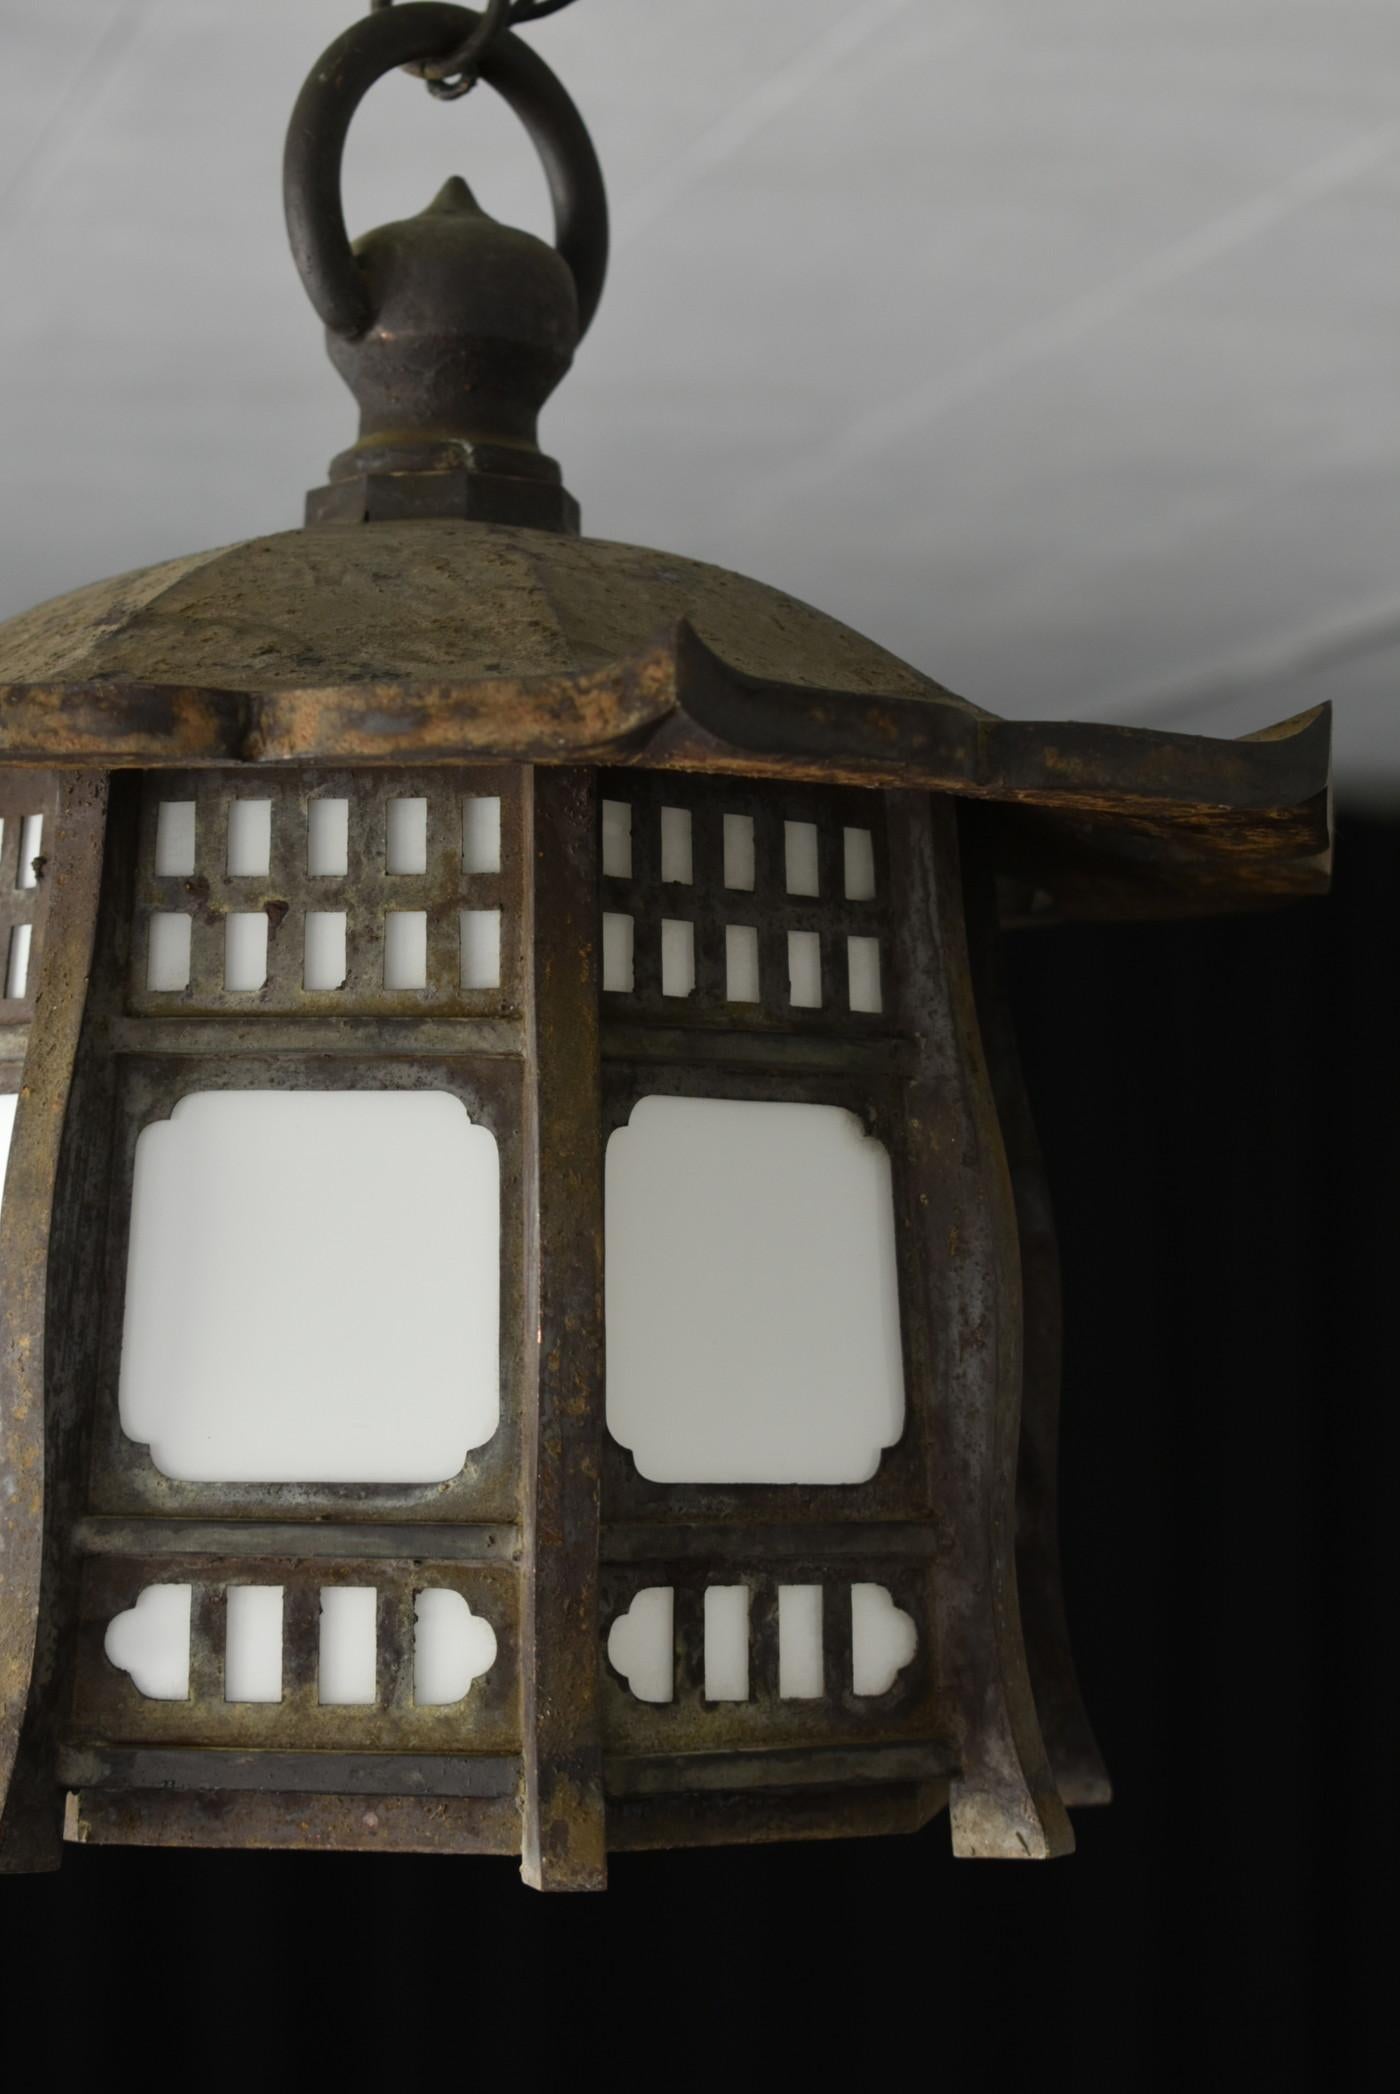 Metalwork Japanese Copper Antique Hanging Lantern/Pendant Light with Ceiling, 1900-1920